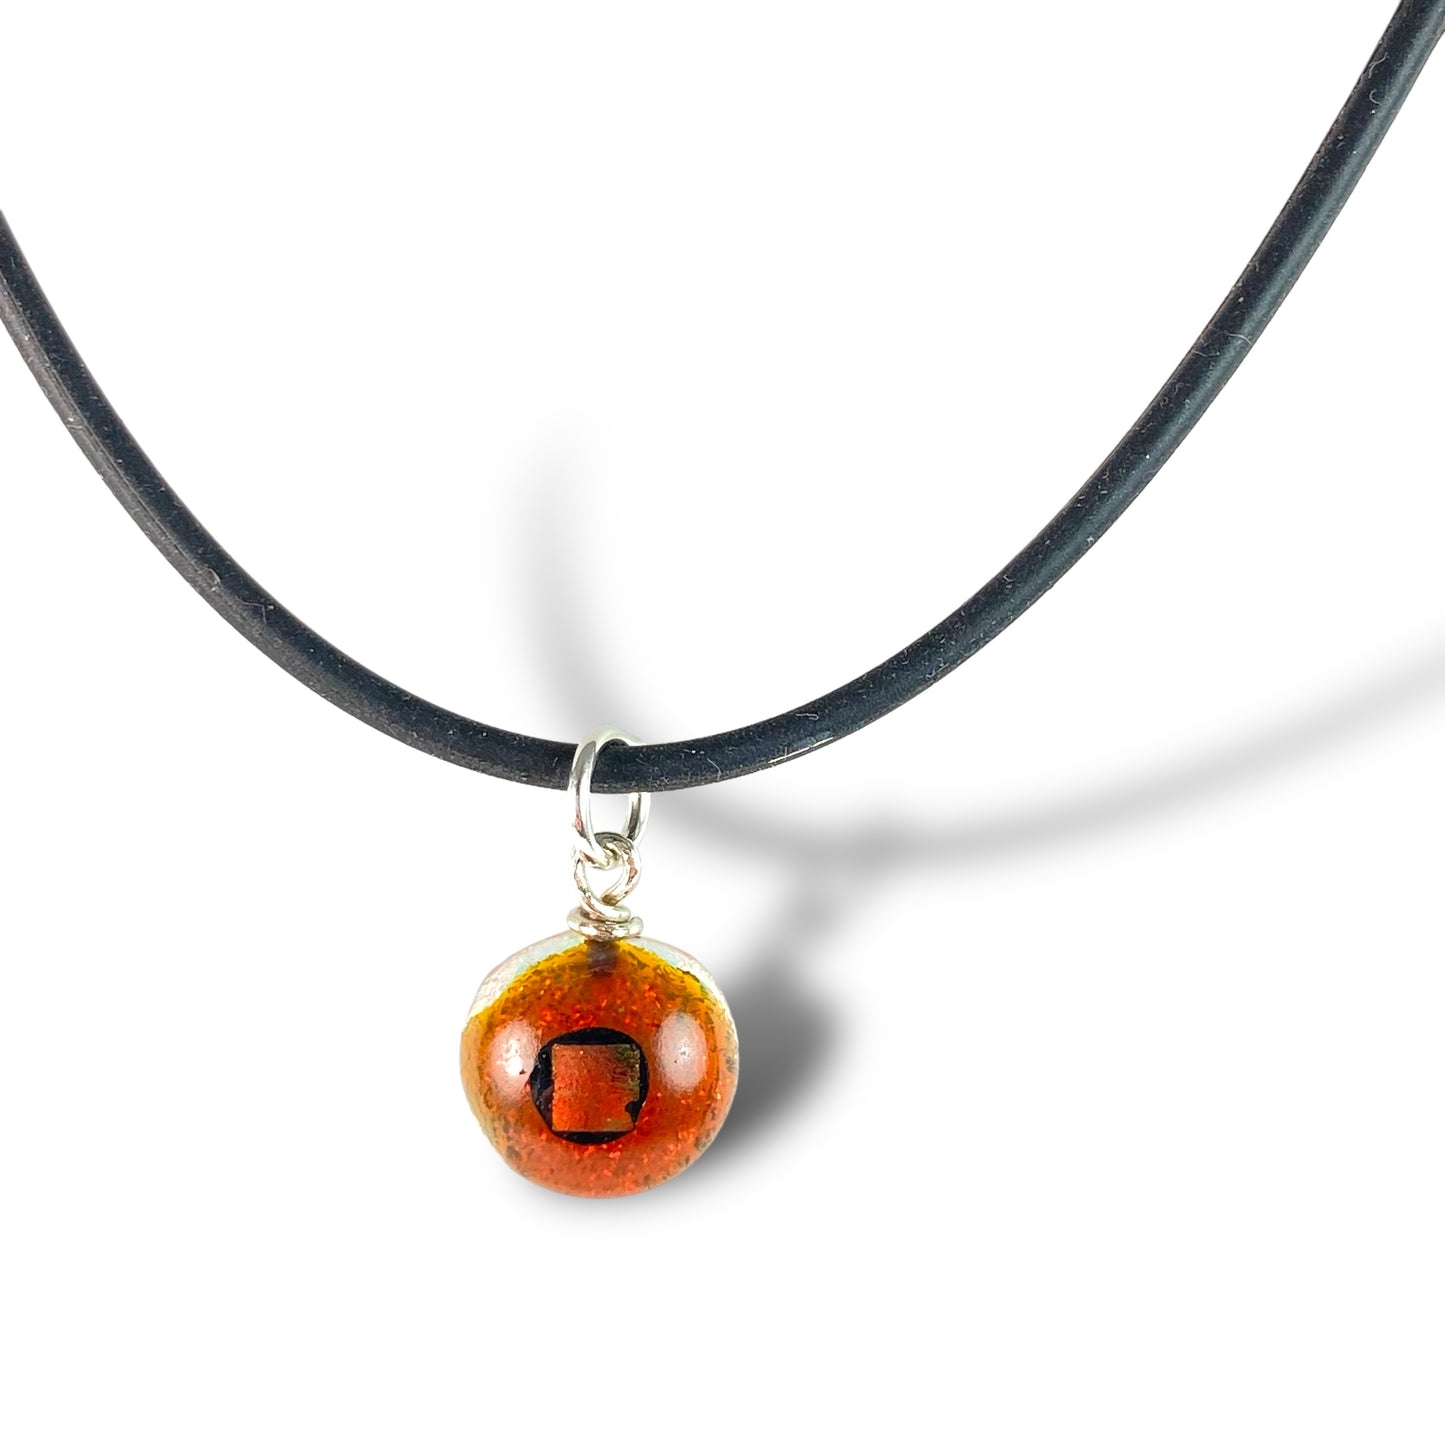 Space Ball Necklace in Rust Orange